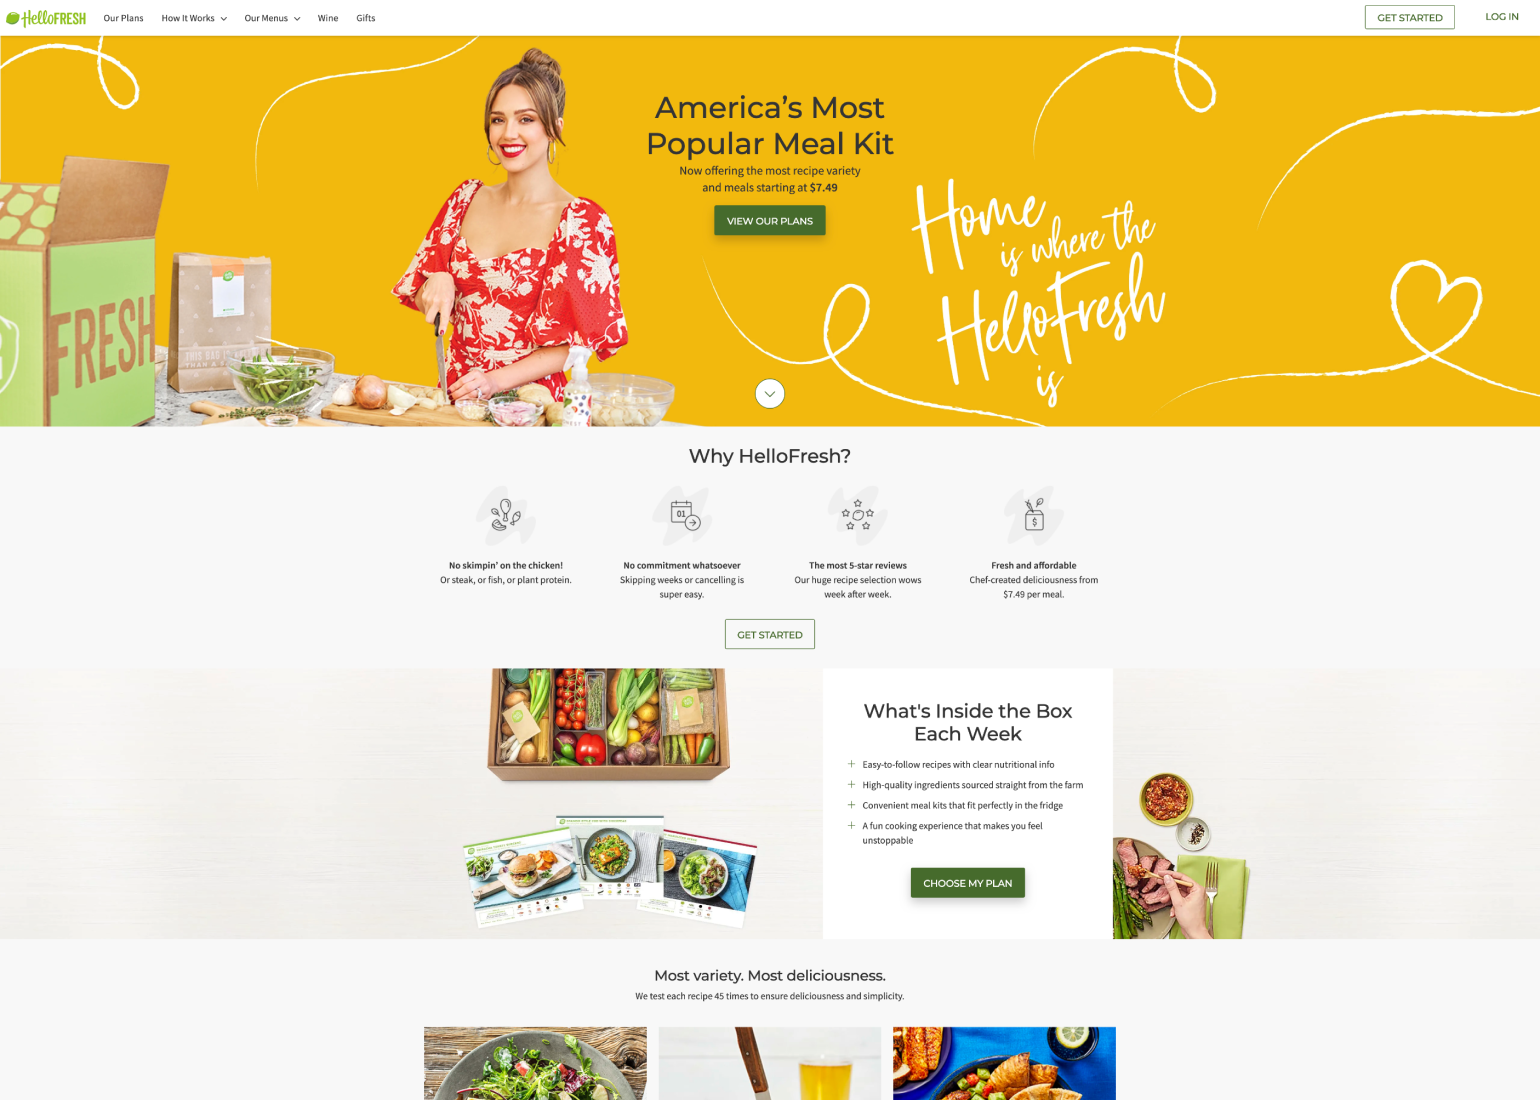 Hellofresh Reduces Landing Page Production Time by 33%